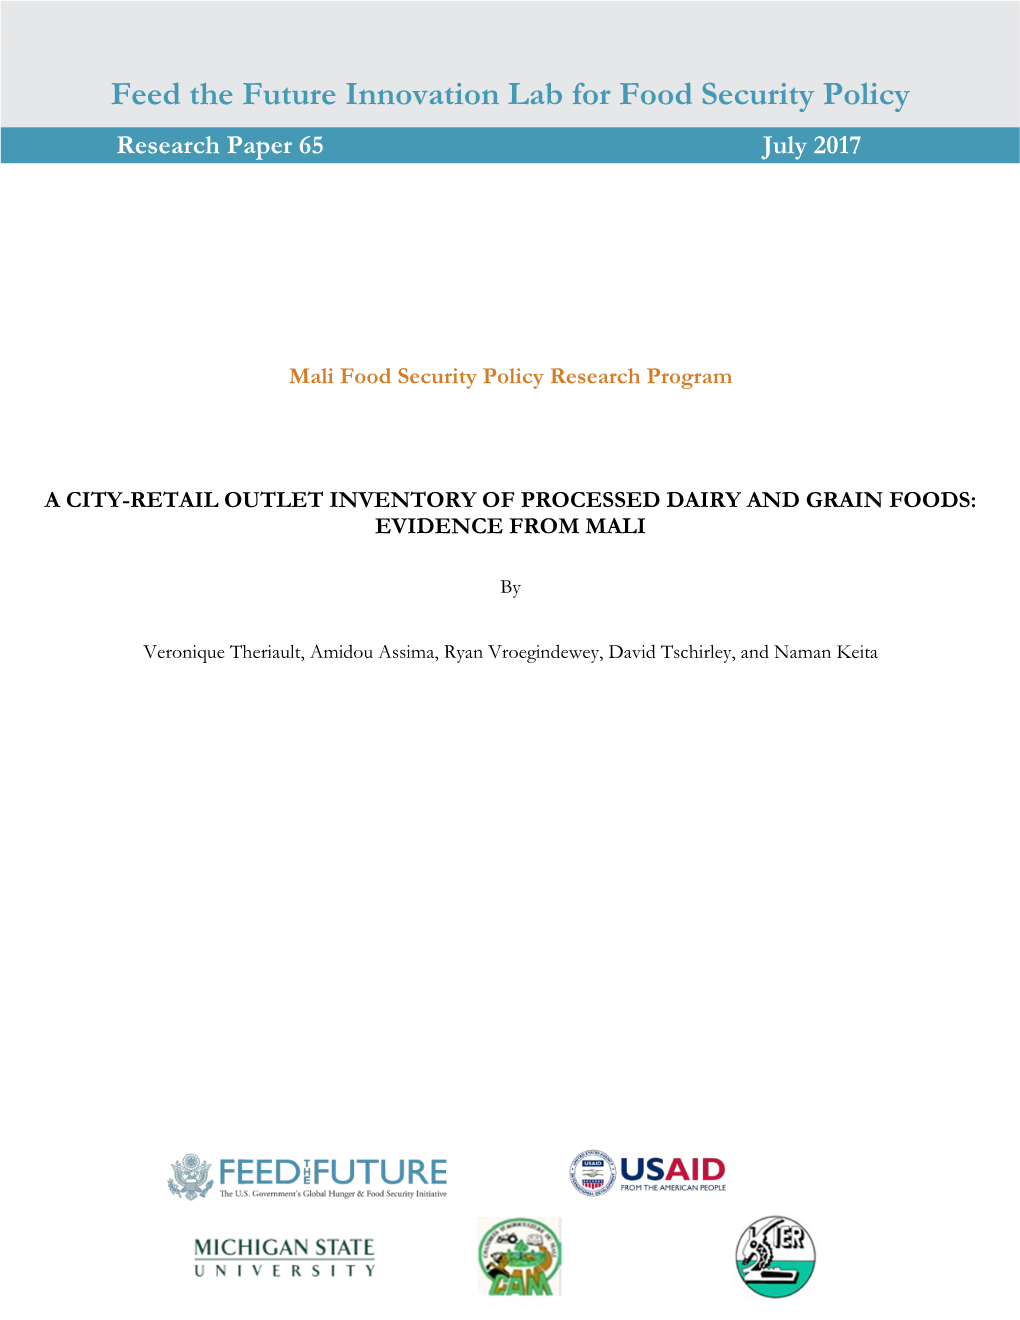 Feed the Future Innovation Lab for Food Security Policy Research Paper 65 July 2017